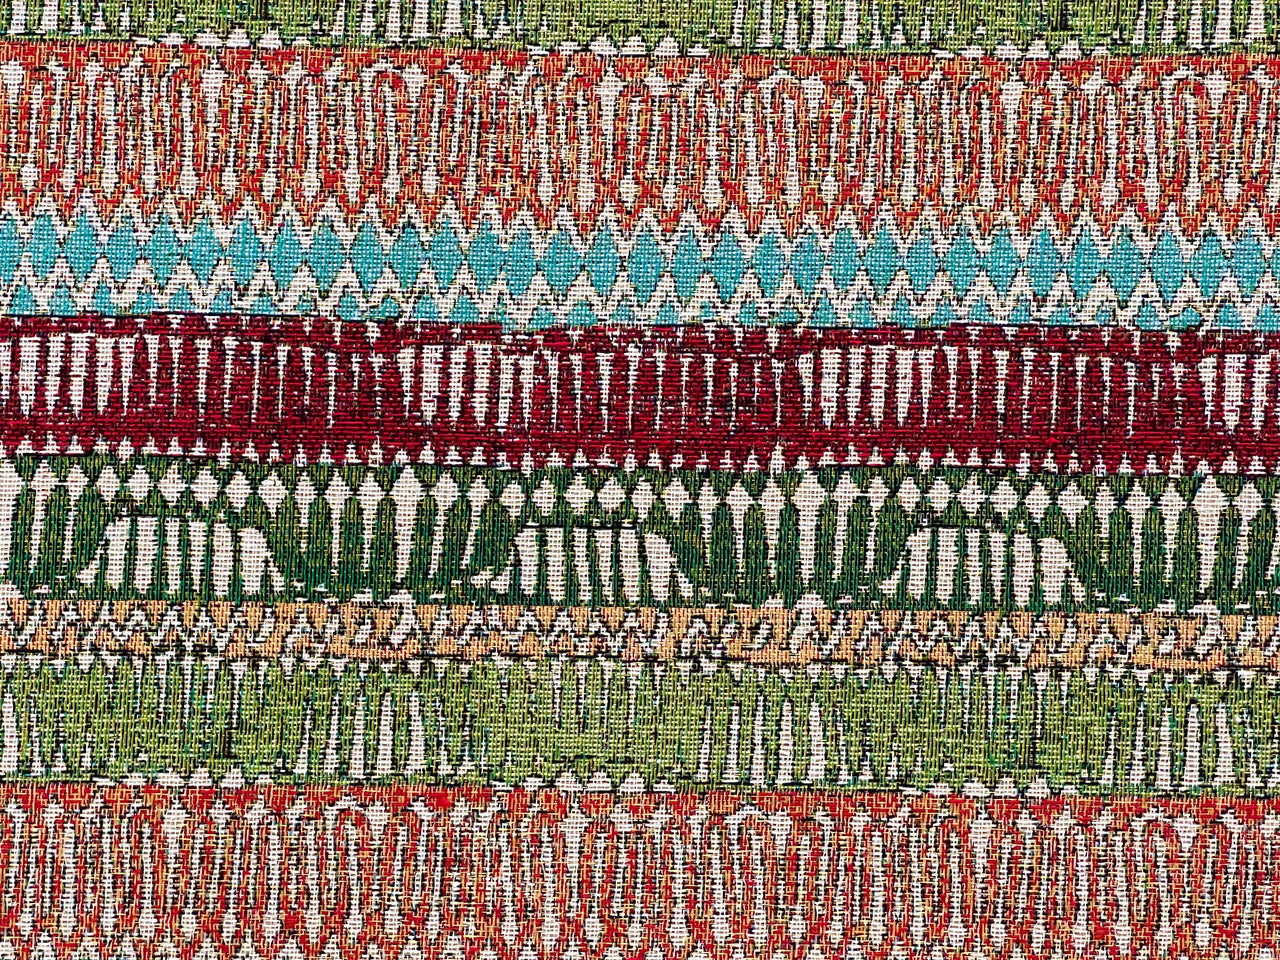 Moroccan-Inspired Kilim Fabric: Cherry Red, Blue, and Green Stripes - Sold by the Metre - Unique Home Decor Textile